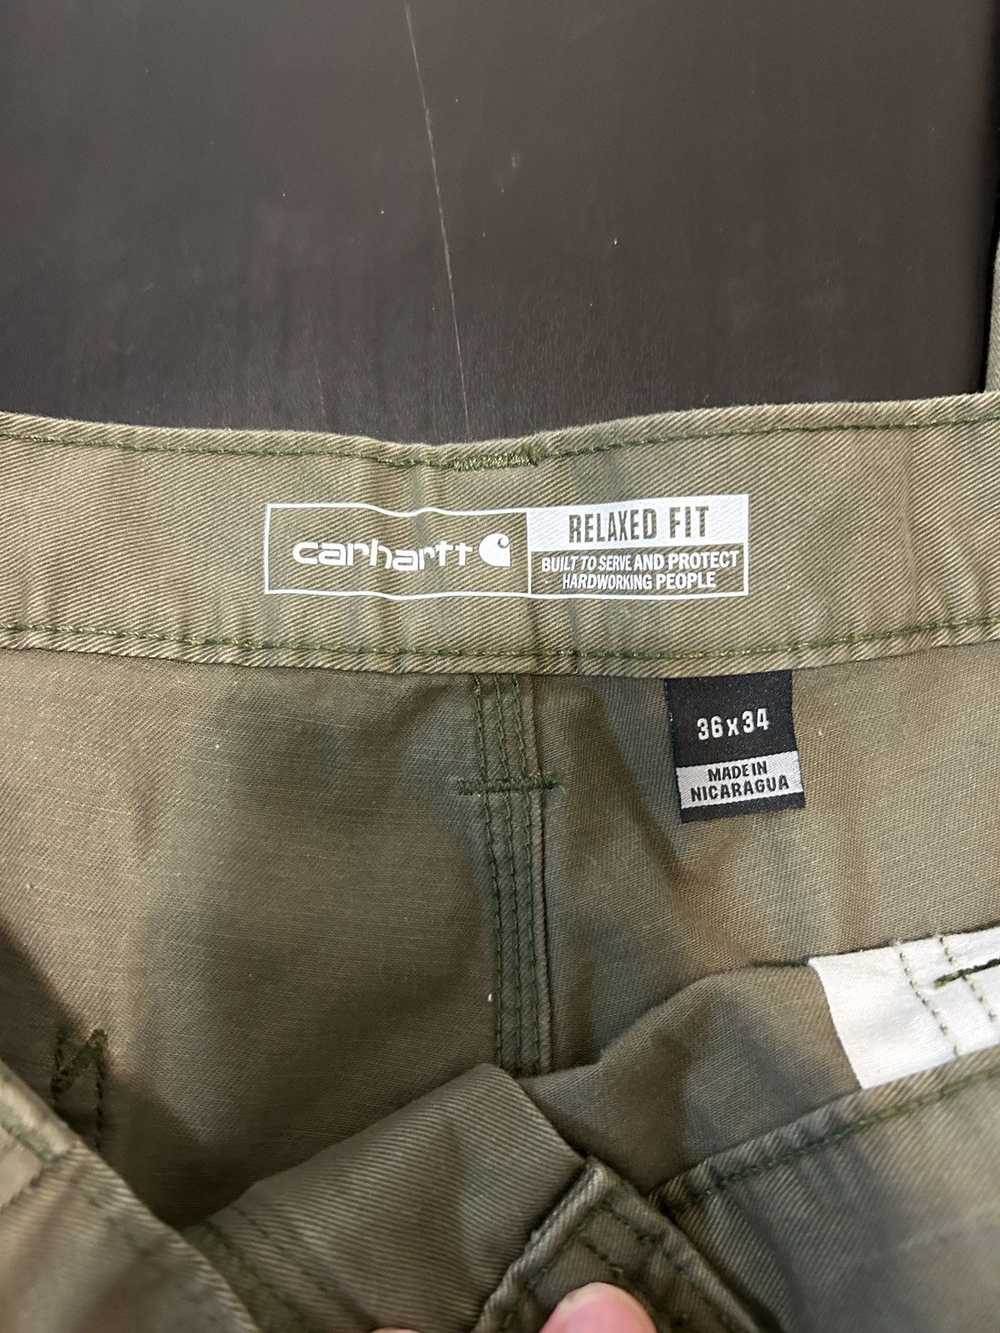 Carhartt Carhartt Work Pants Relaxed Fit 36x34 - image 2